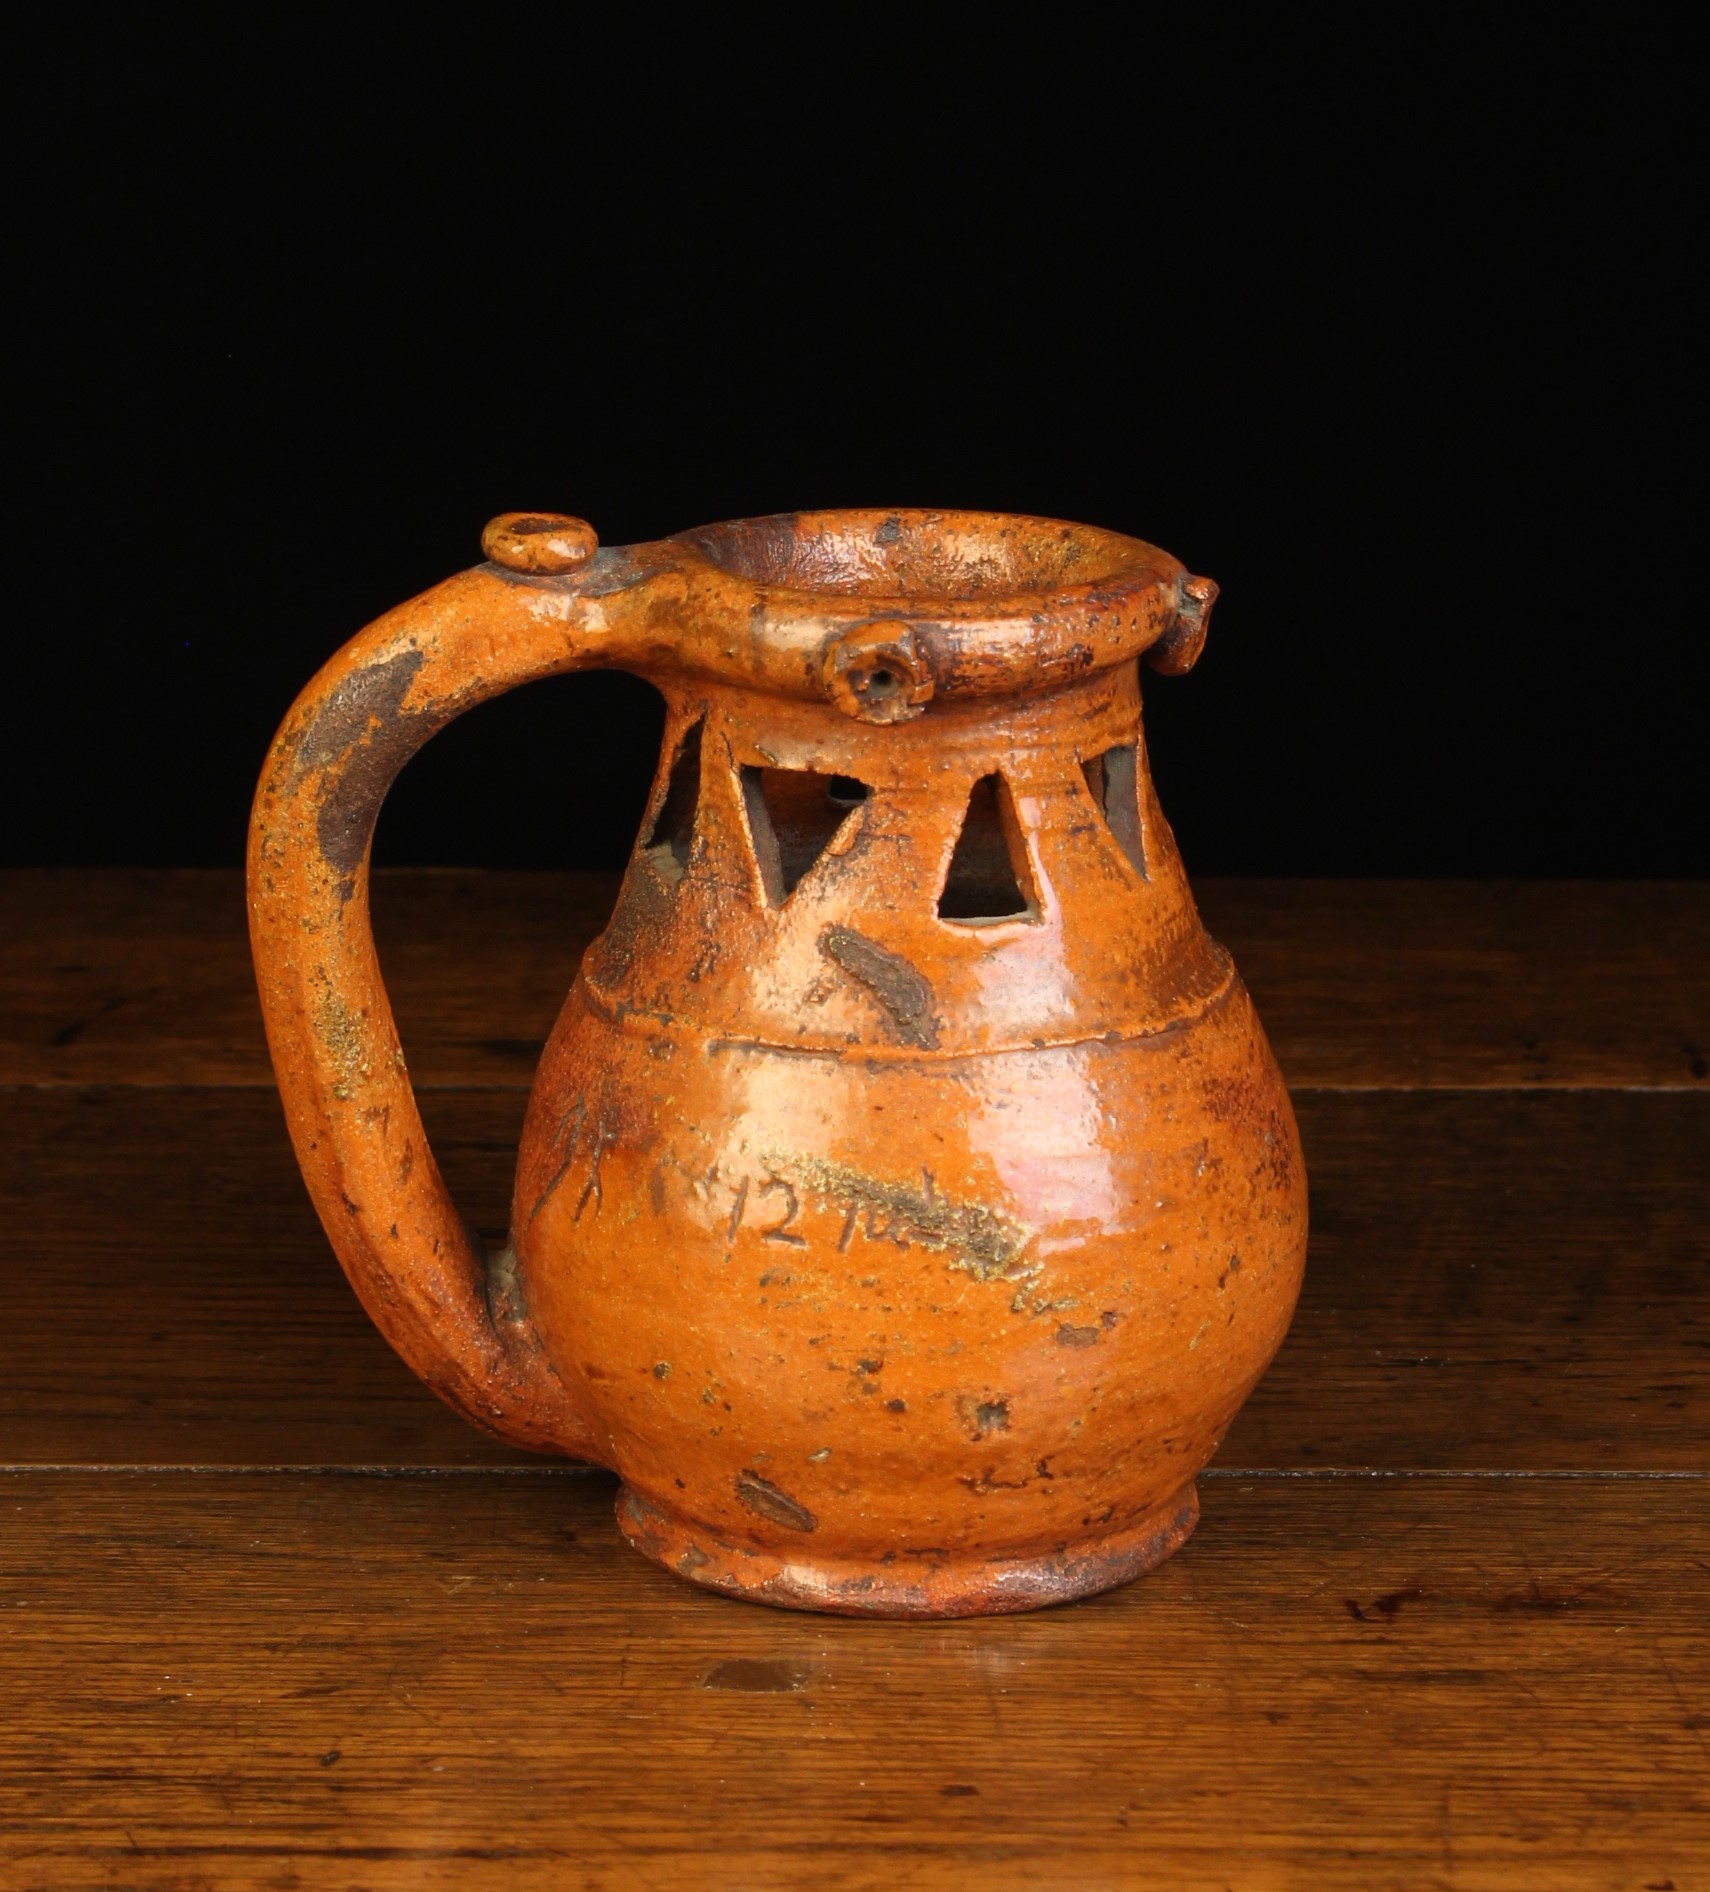 A Small Late 18th Century Orange Glazed Earthenware Puzzle Jug incised with date 1791.